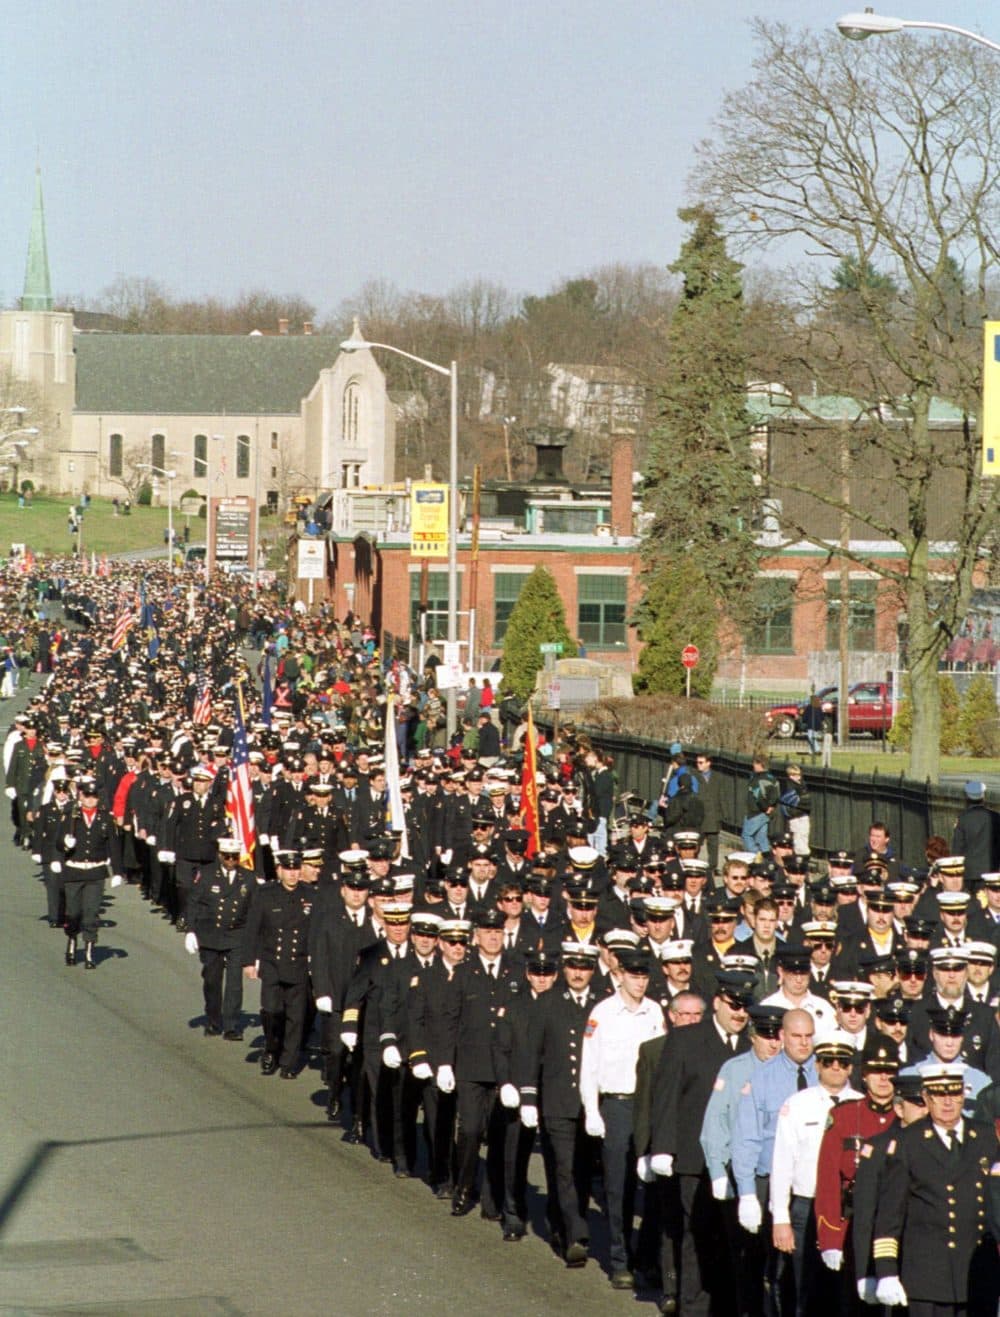 Some of an estimated 30,000 fire and public safety personnel who marched in memory of the Fallen Six as part of ceremonies held Dec. 9, 1999. (Neal Hamberg/AP)